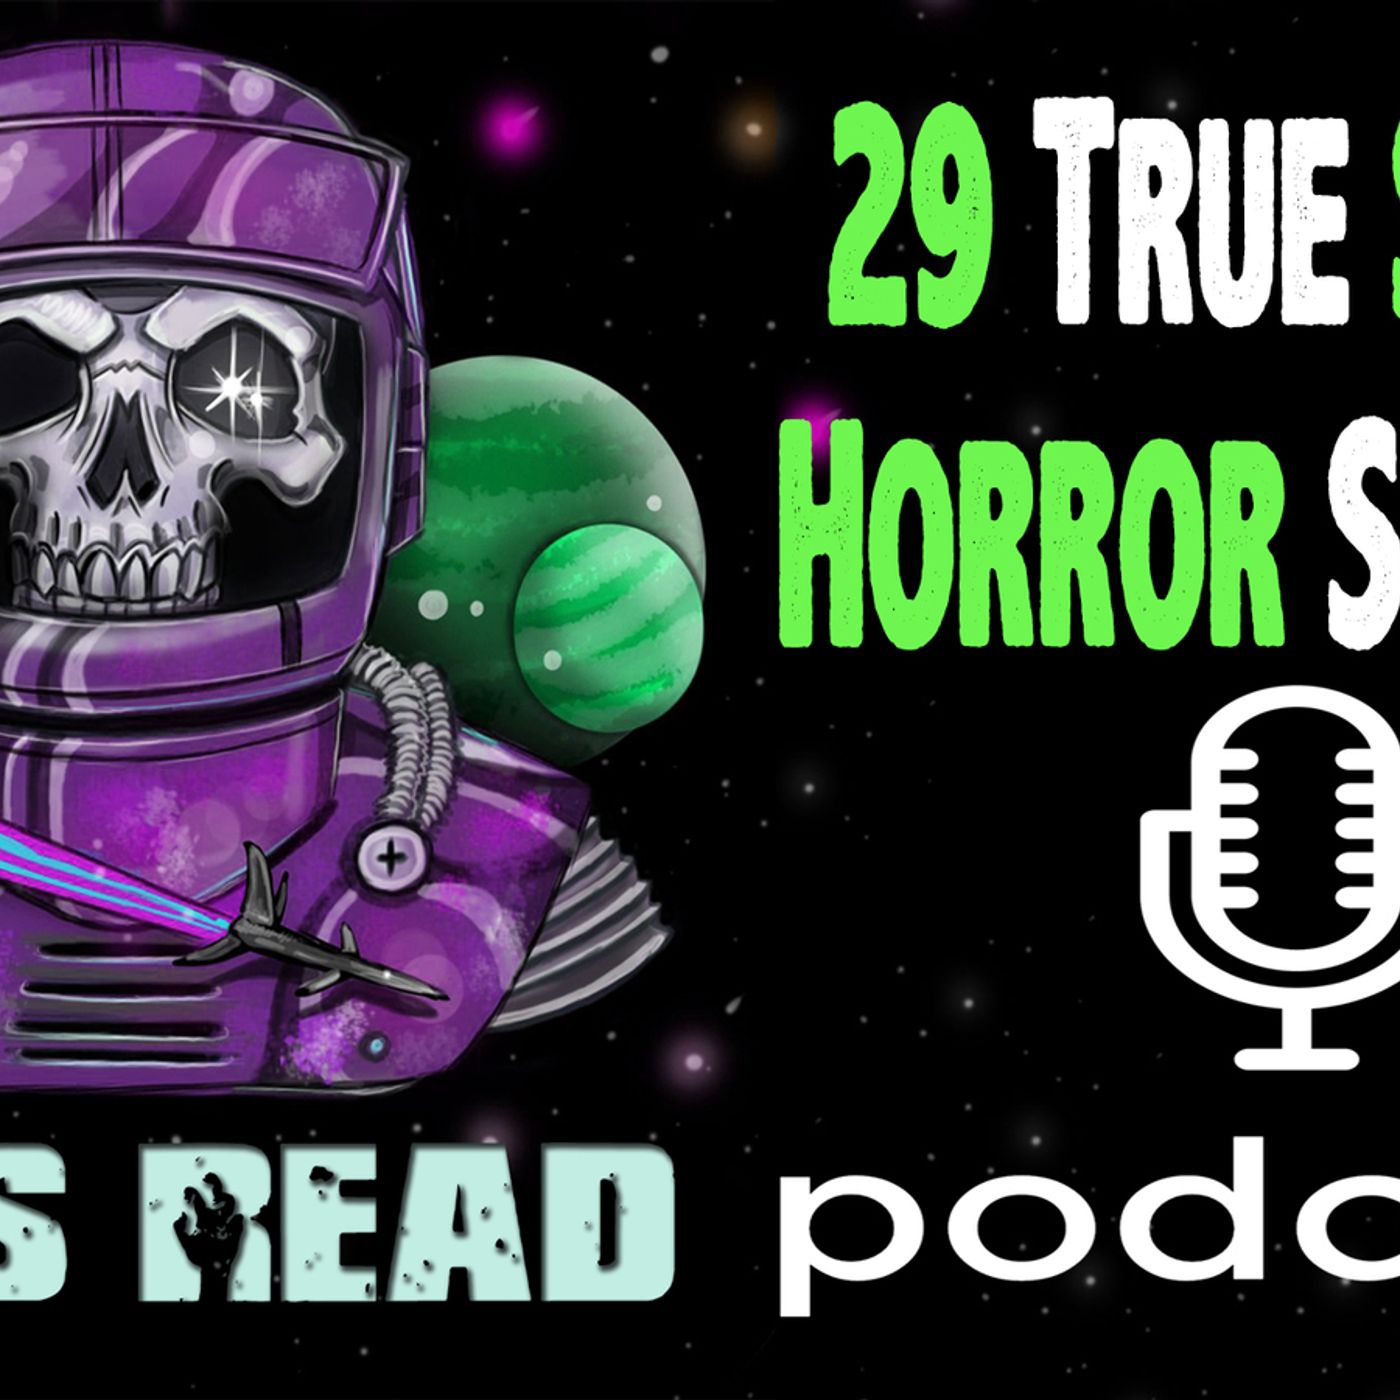 43: Episode 041 | Home Invasion & Fast Food Stories | 29 True Scary Horror Stories